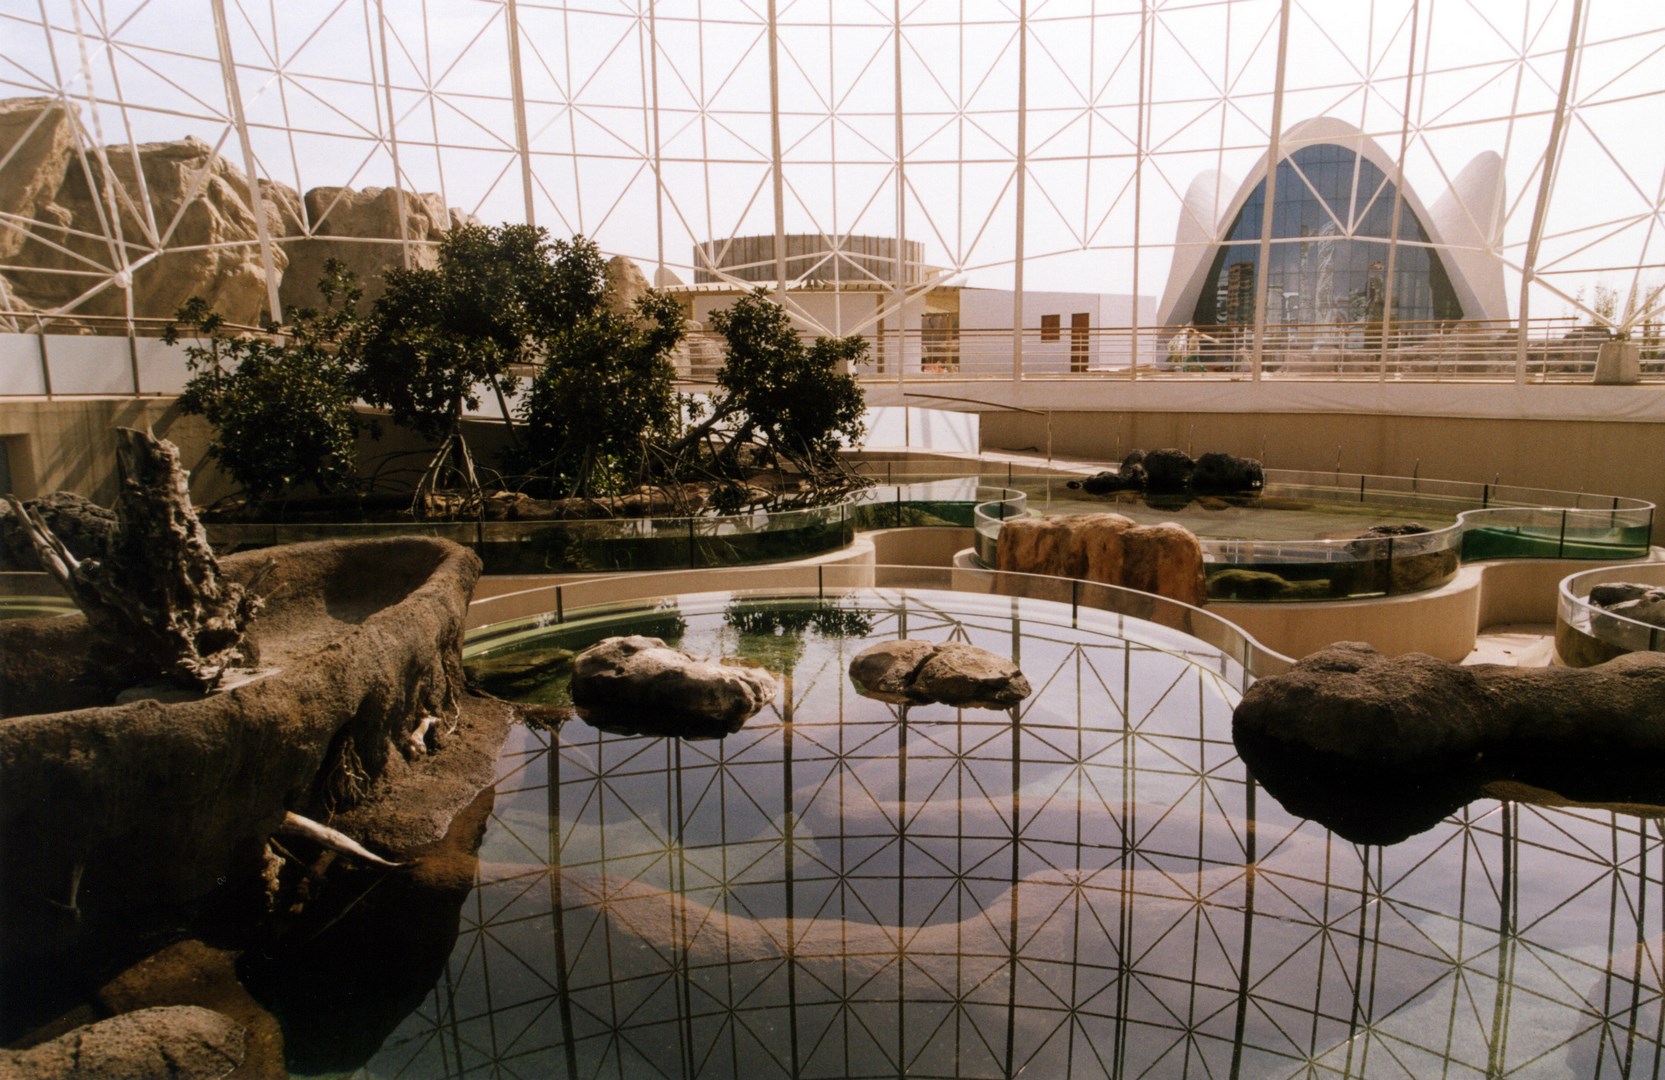 Interior of the spatial structure – bird zone